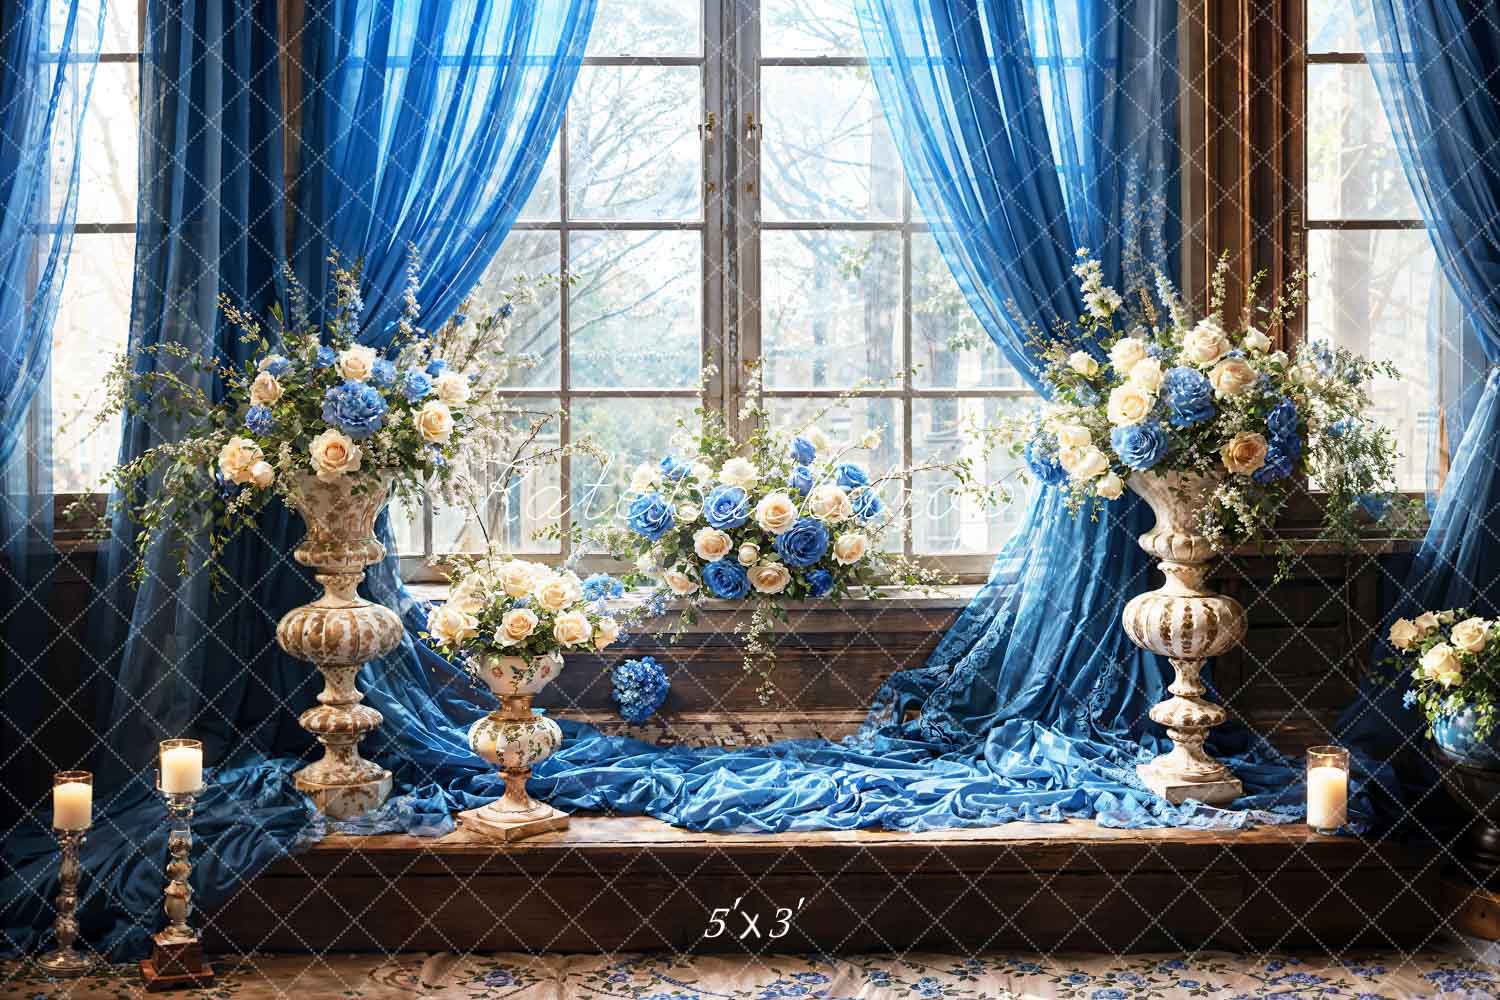 Kate Blue Flowers Candles Window Room Backdrop Designed by Emetselch